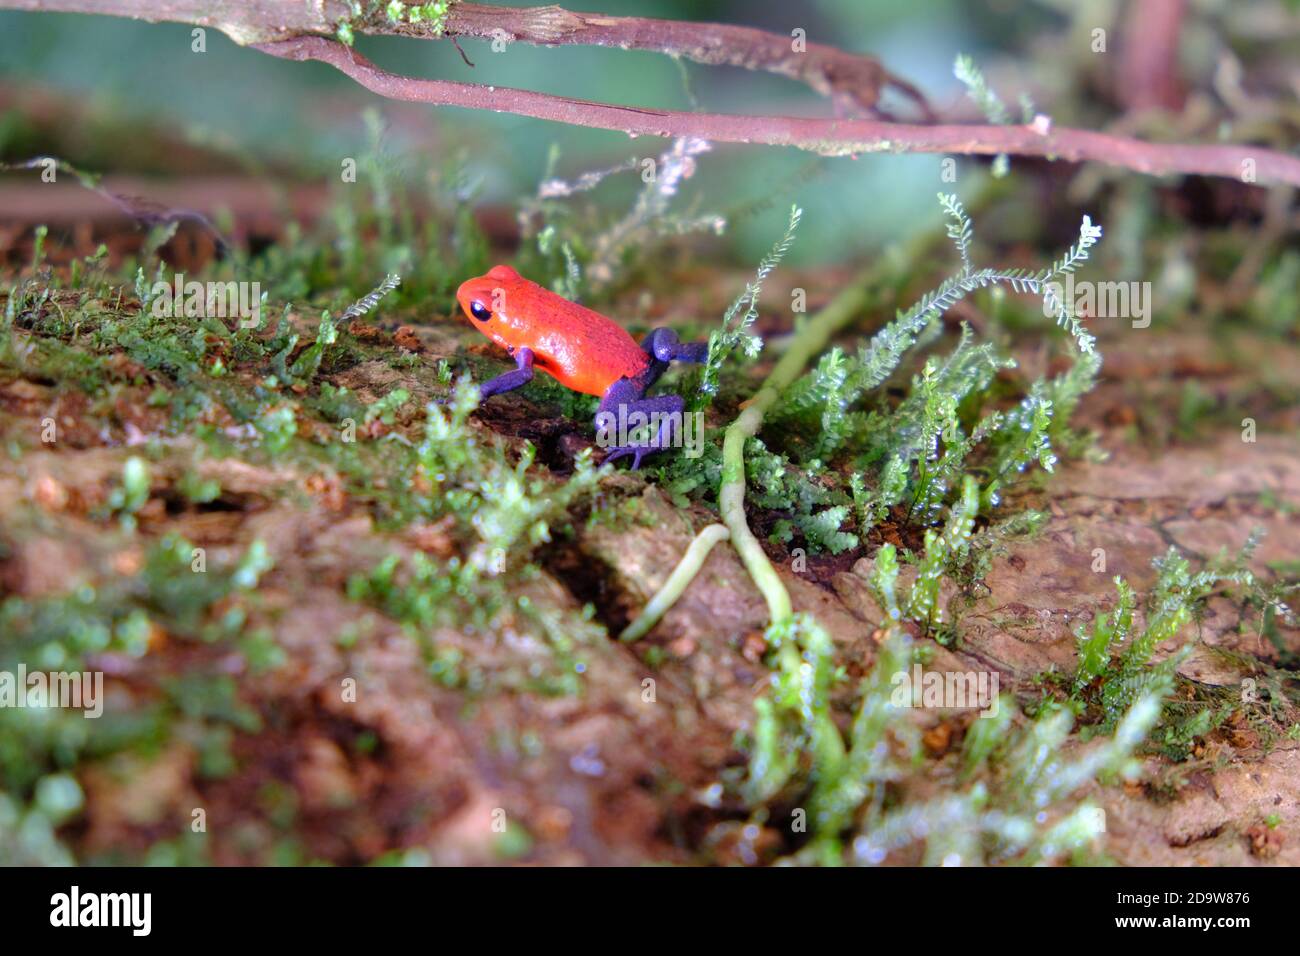 Costa Rica Arenal Volcano National Park - Strawberry poison frog or Strawberry poison-dart frog - Oophaga pumilio Stock Photo